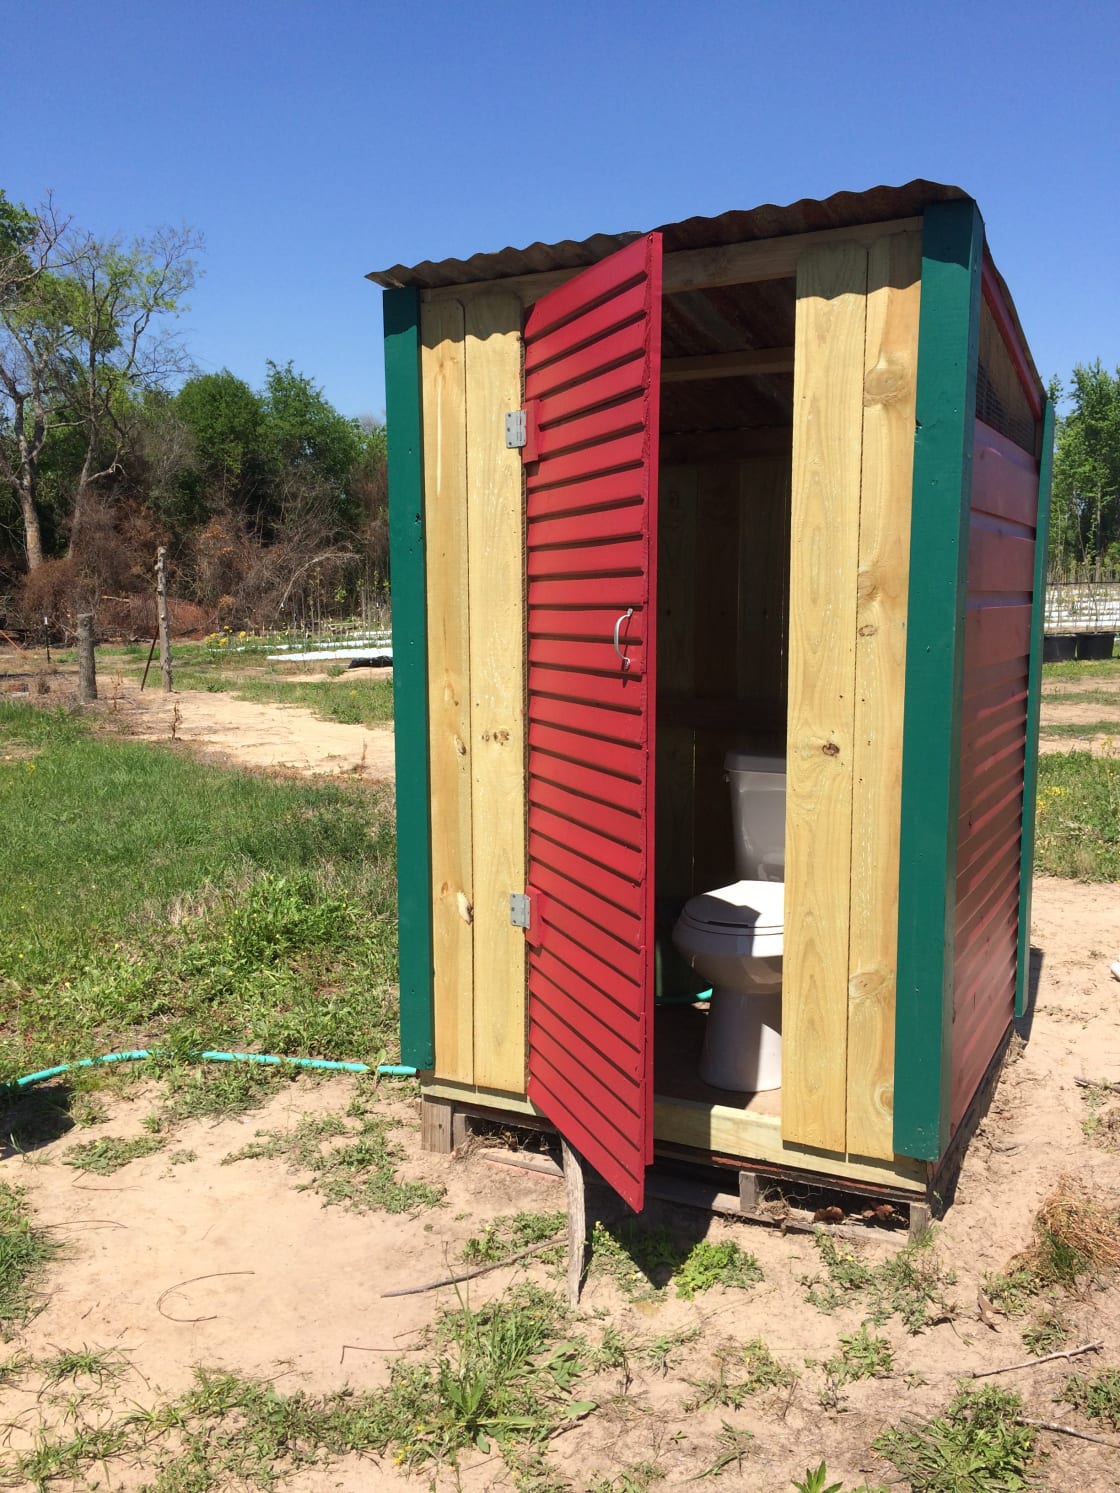 Outhouse is located near the farmhouse and in walking distance of camp sites; there is also a utility sink with non-potable water.